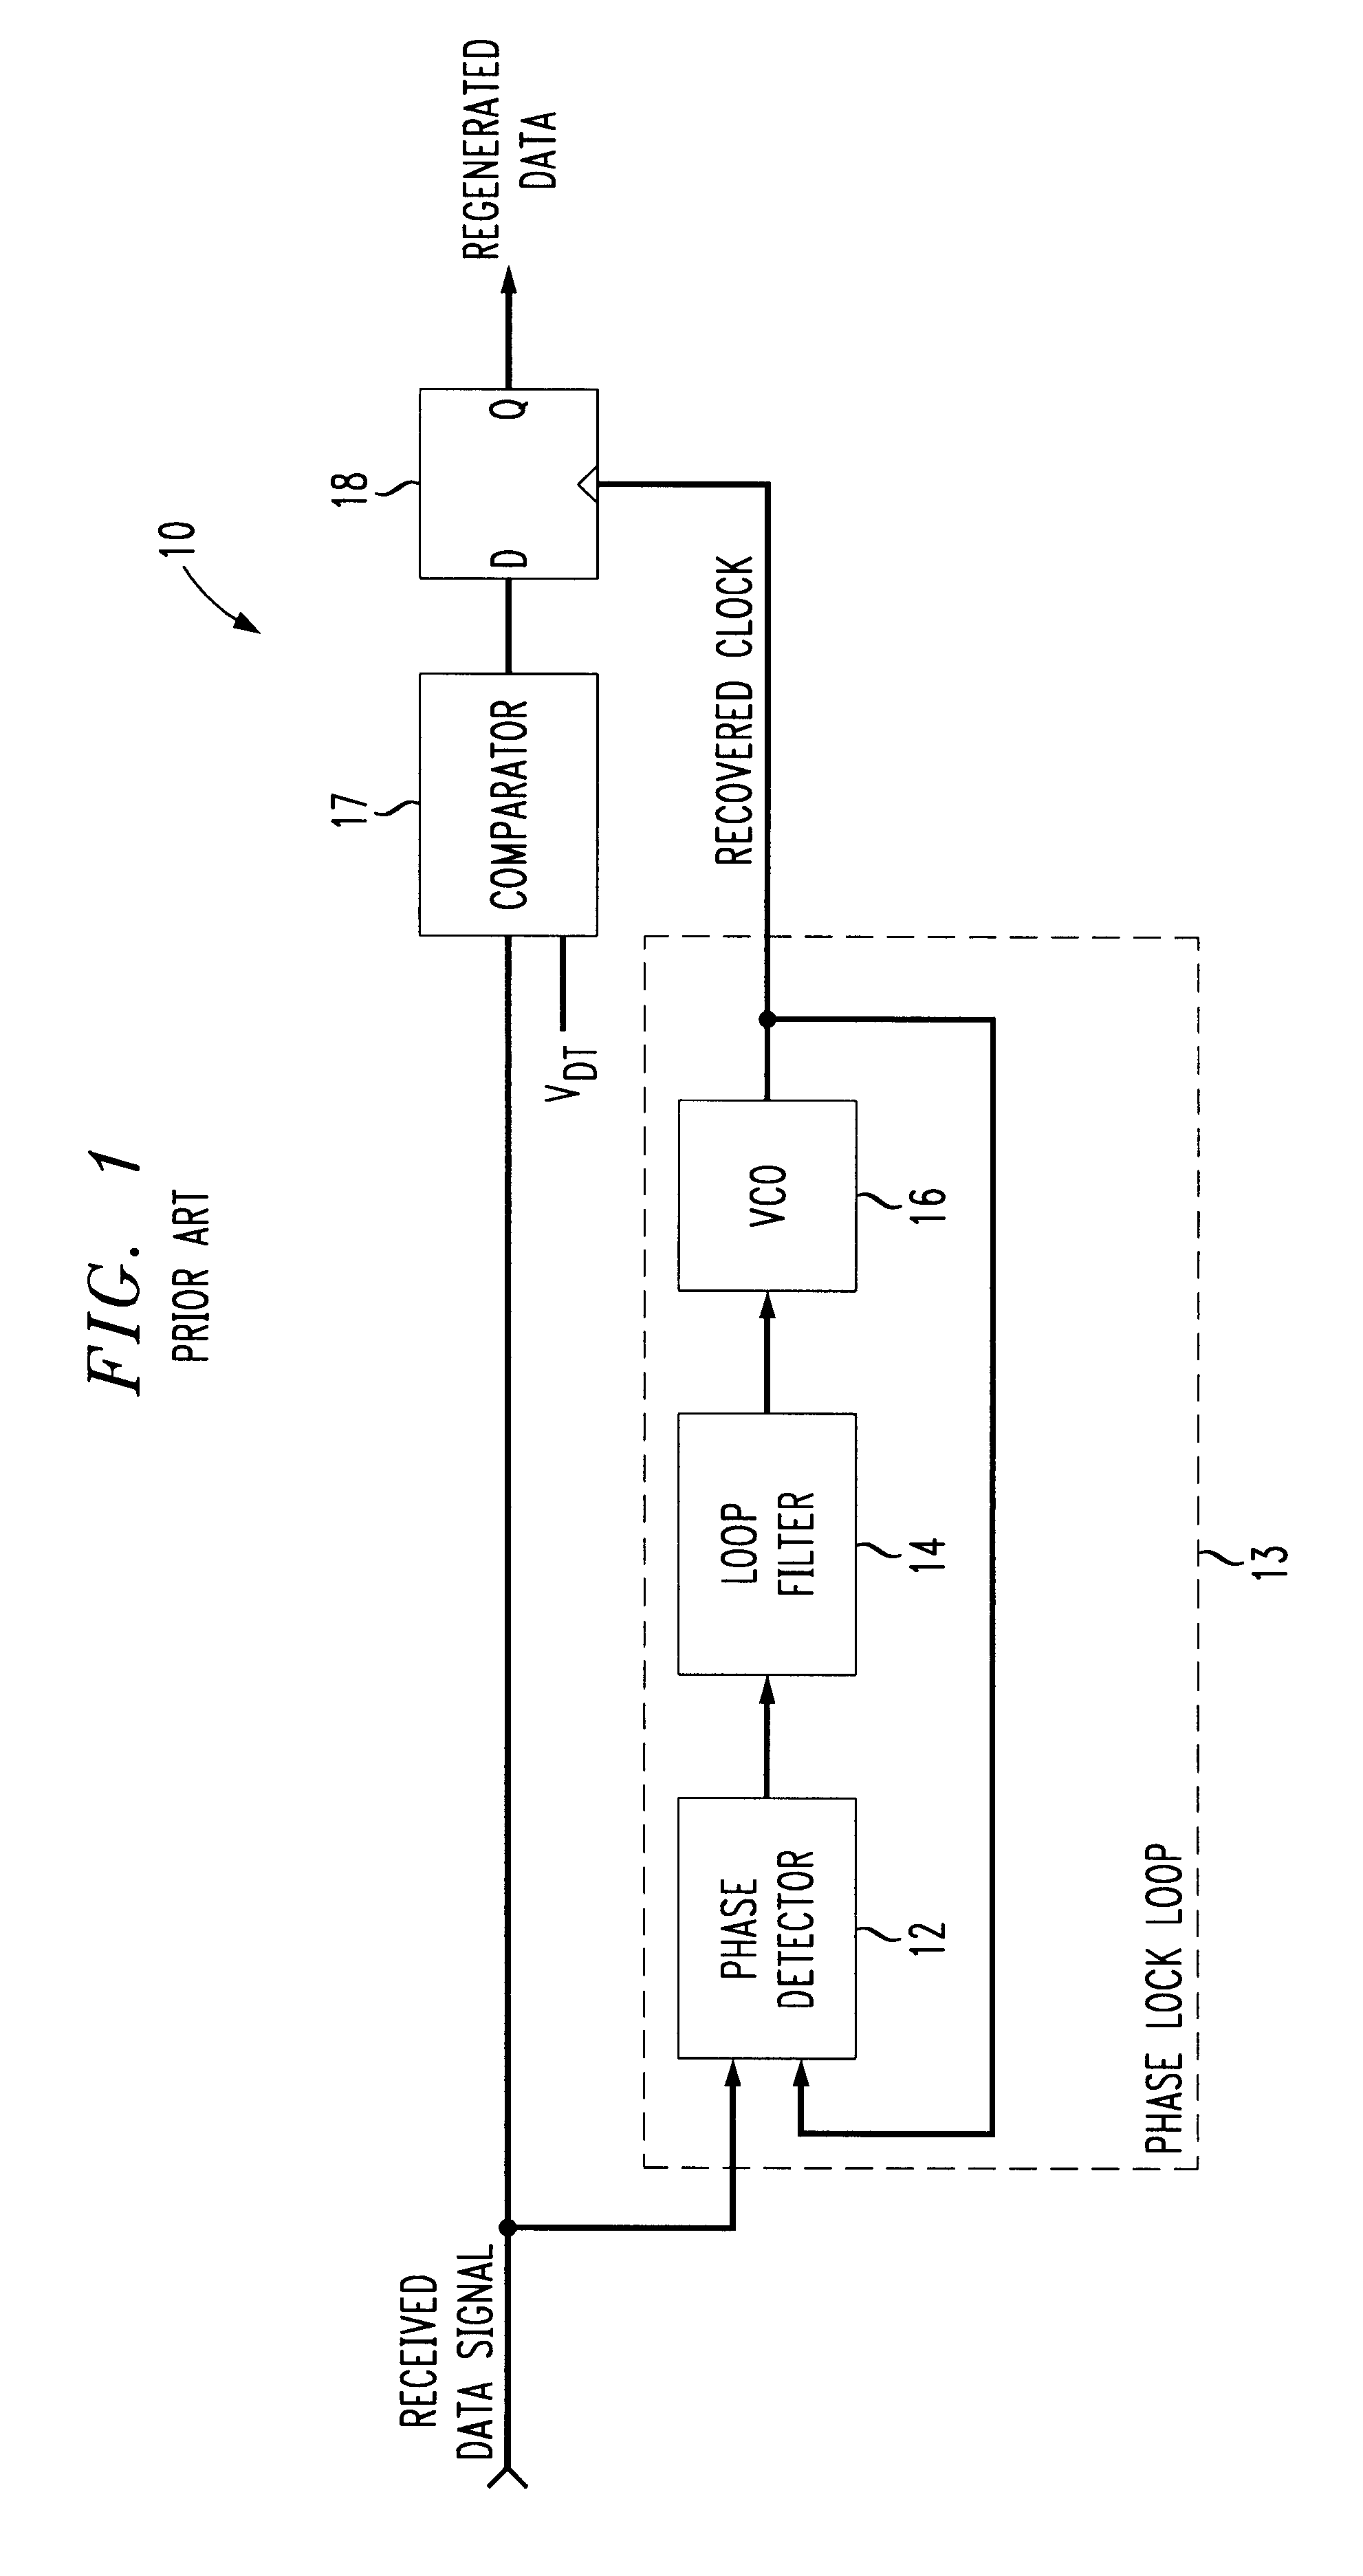 Self-aligned clock recovery circuit with proportional phase detector